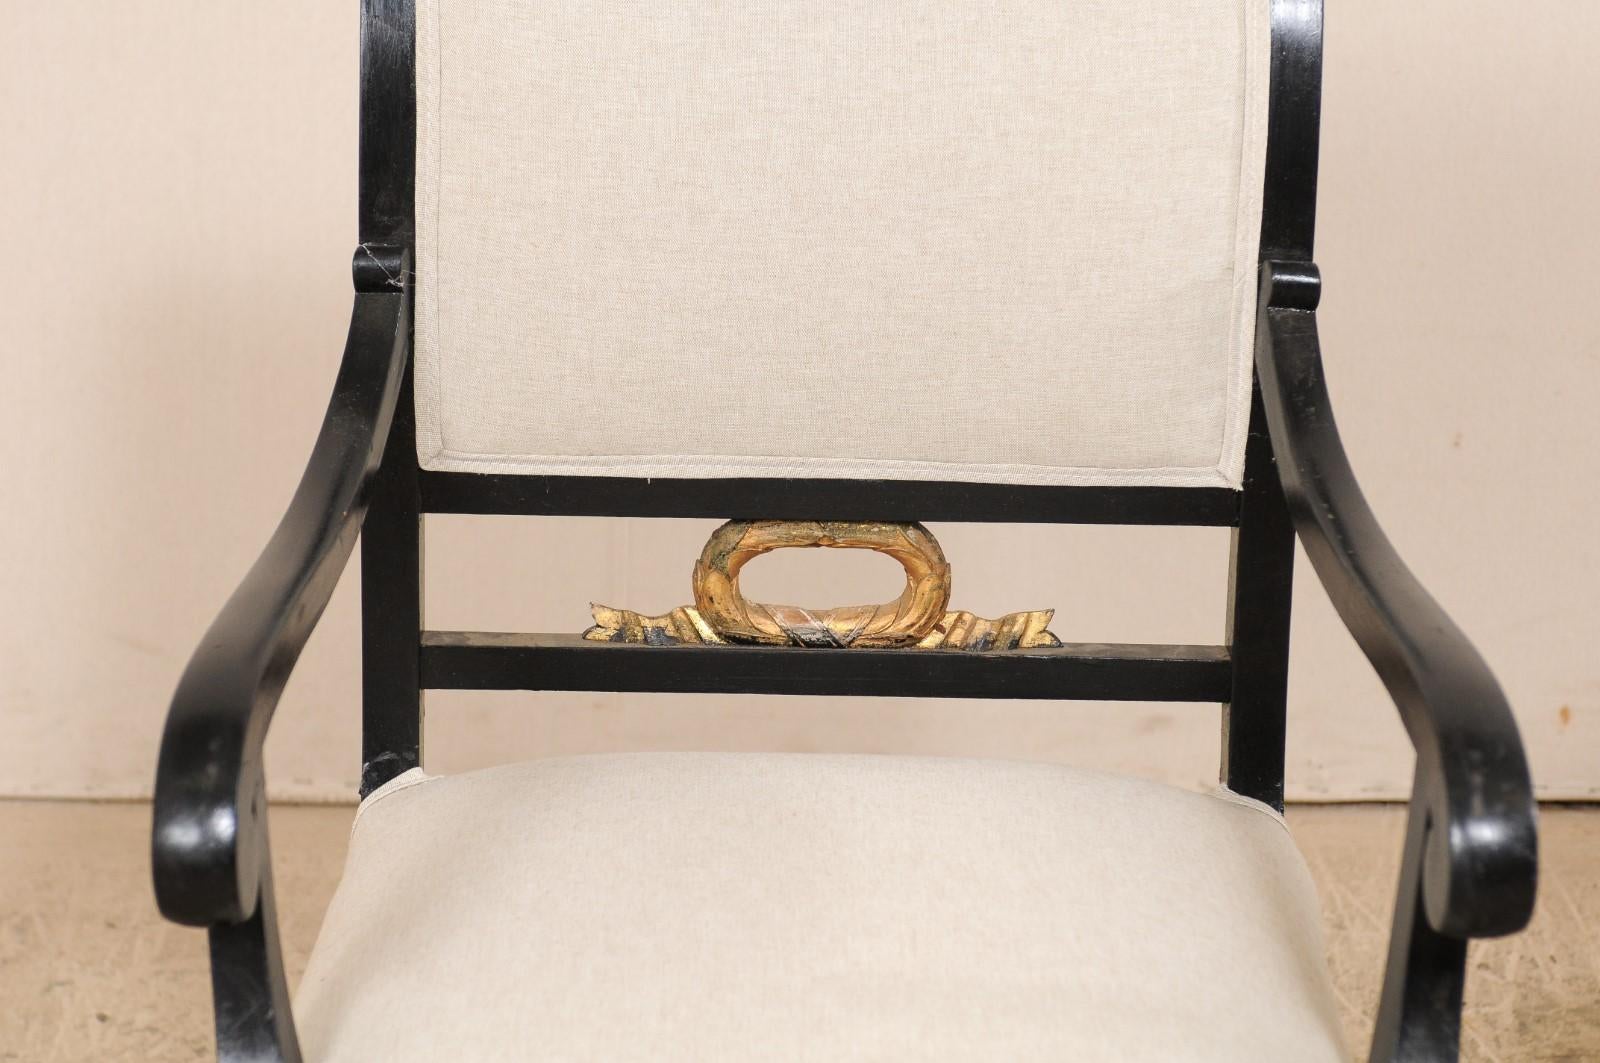 Pair of Swedish Empire Armchairs in Black w/Gold Accents from the Mid-19th C. For Sale 4